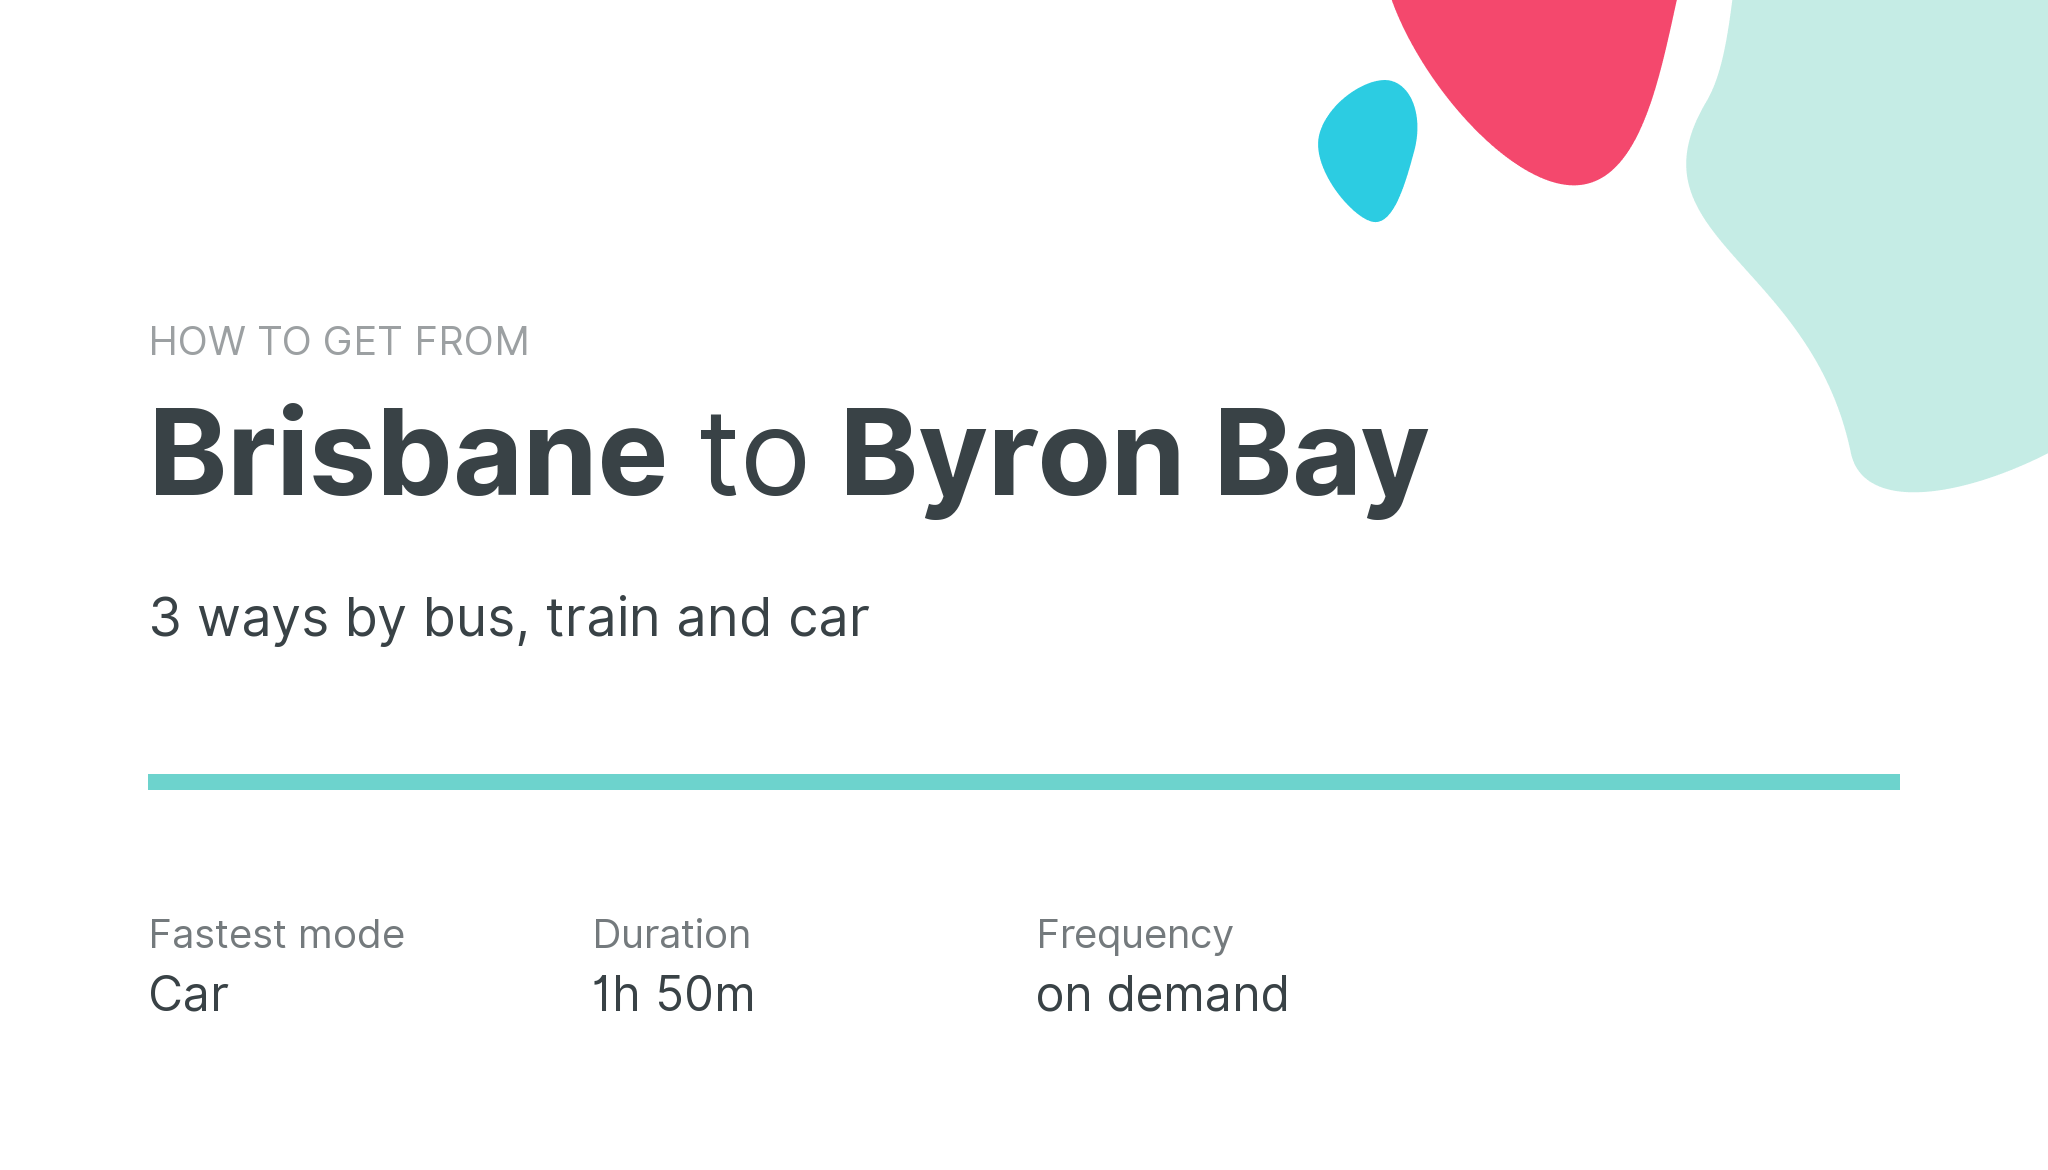 How do I get from Brisbane to Byron Bay